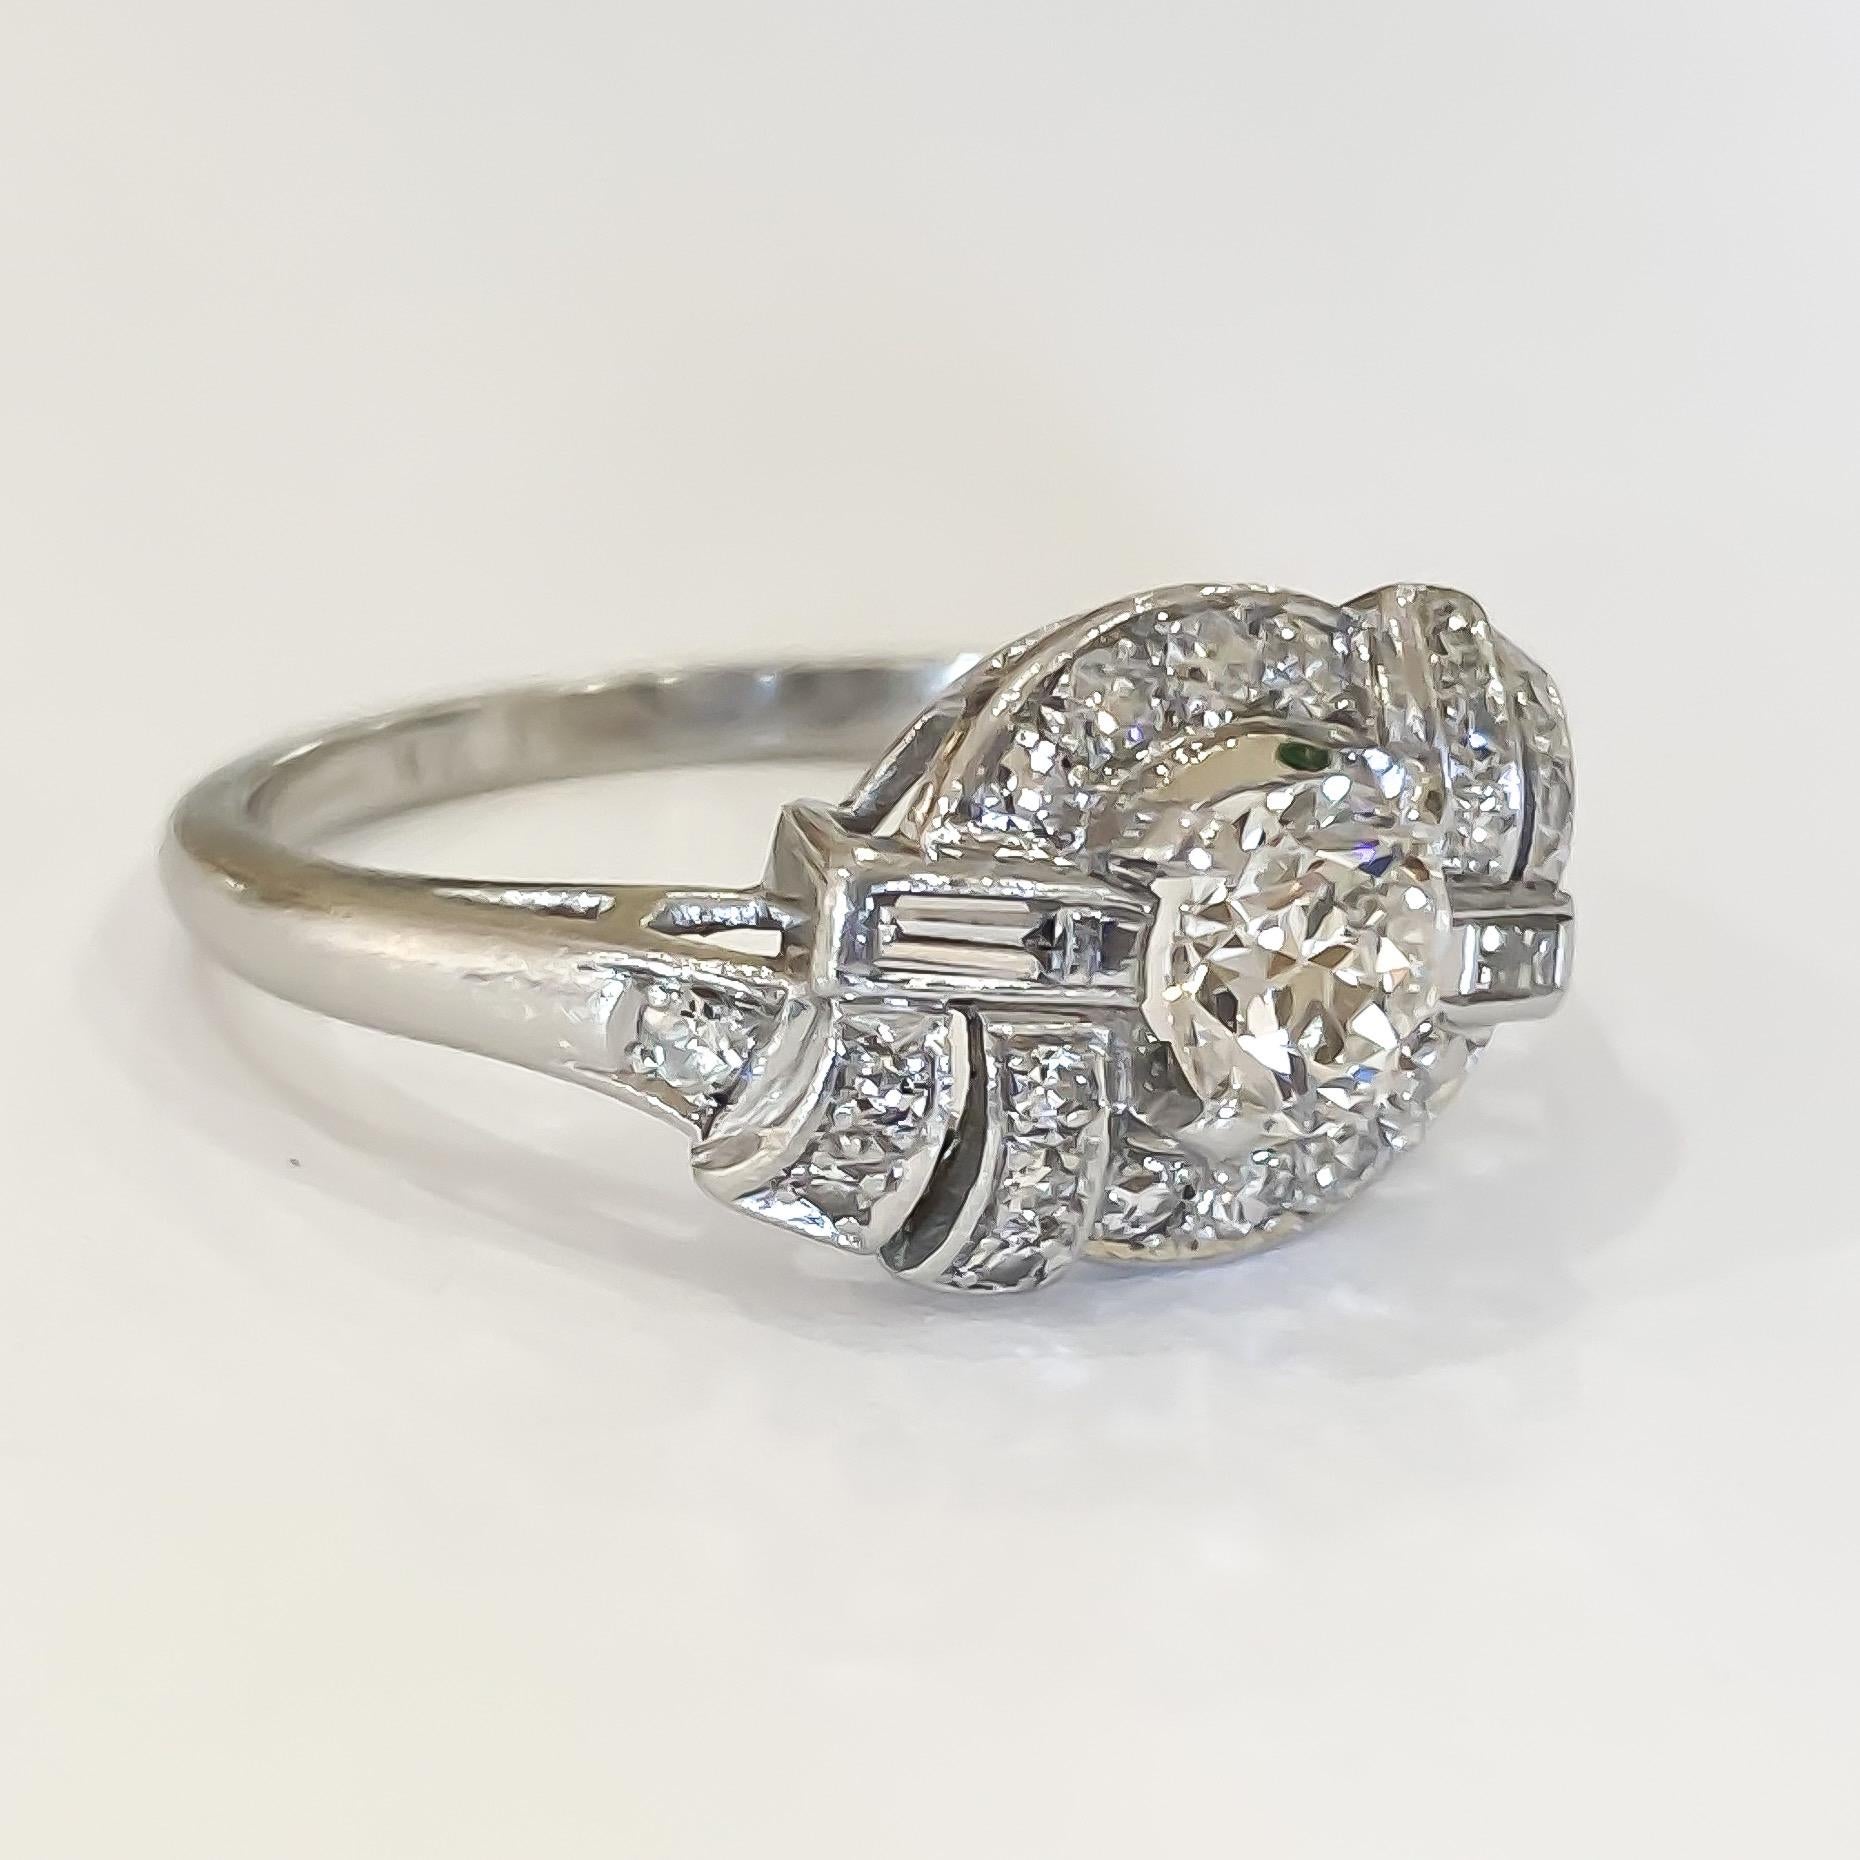 Authentic vintage Art Deco diamond ring designed in Platinum and set with old European, single and baguette cut diamonds. The center is set in four prongs flanked by pave set diamonds in an offset ribbon mounting. The baguette diamonds are bezel set